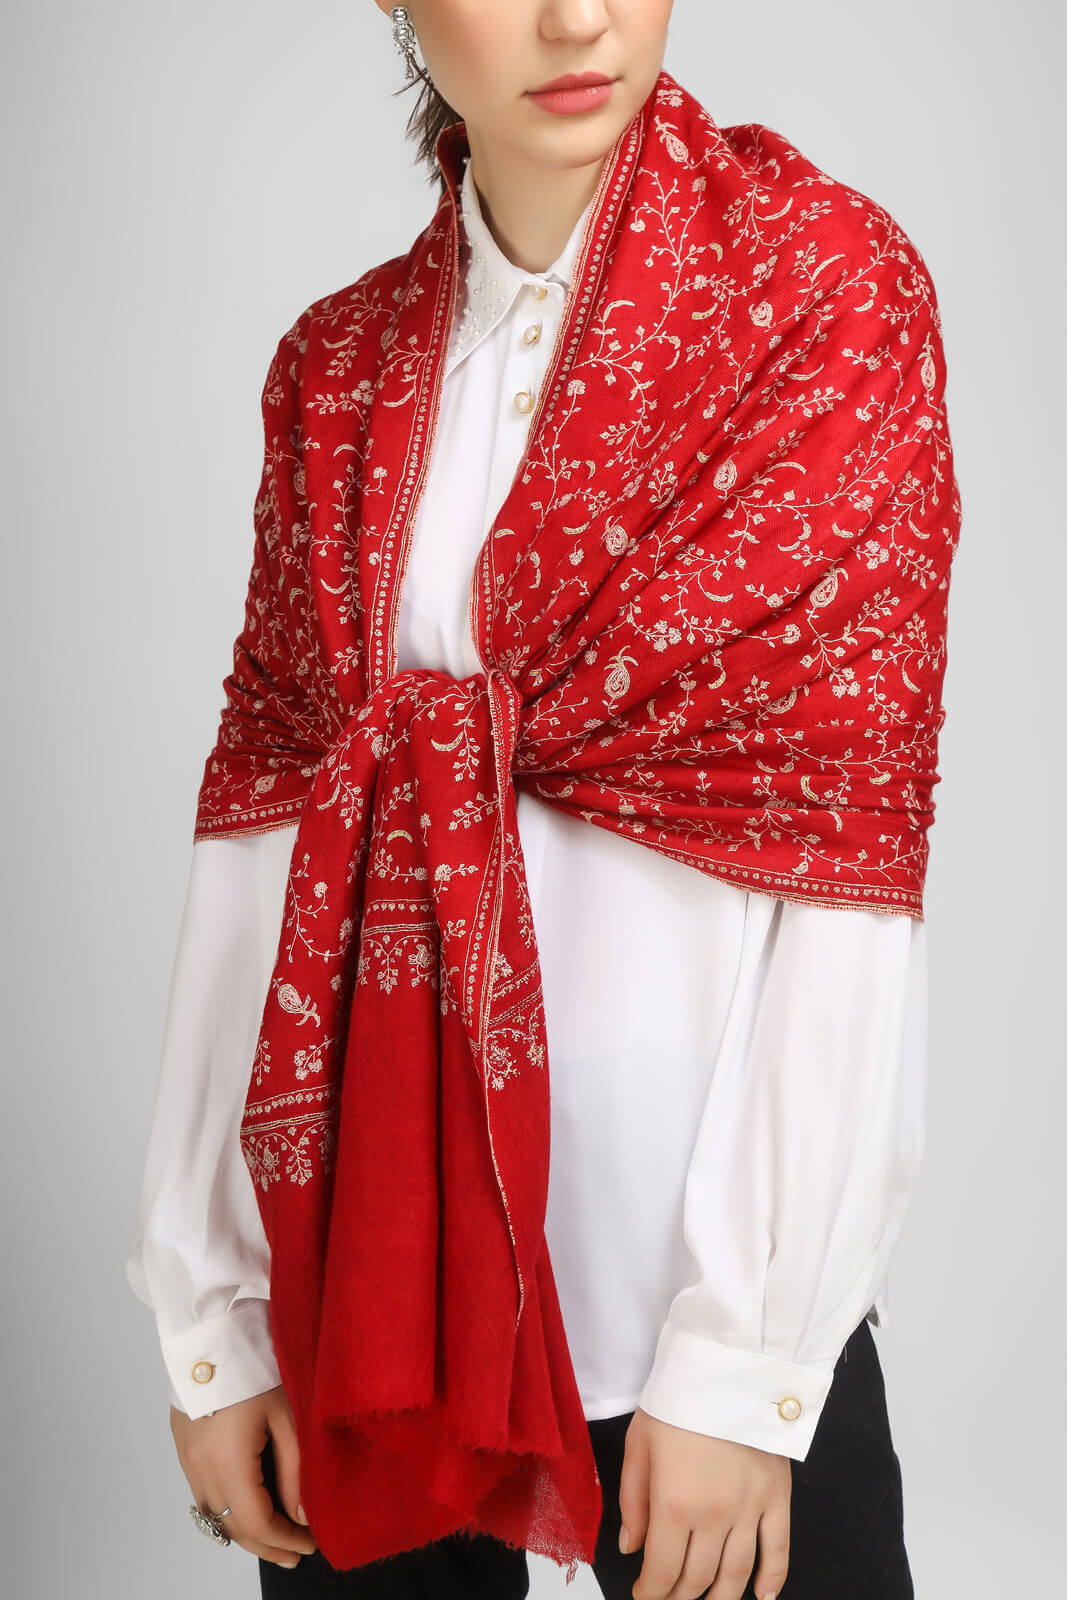 PASHMINA EMBROIDERY STOLE - Red Pashmina Jaldaar stole - "We deliver exquisite products to your doorstep in the United States, China, Japan, Germany, United Kingdom, France, Canada, and Paris. Experience seamless international delivery with us."